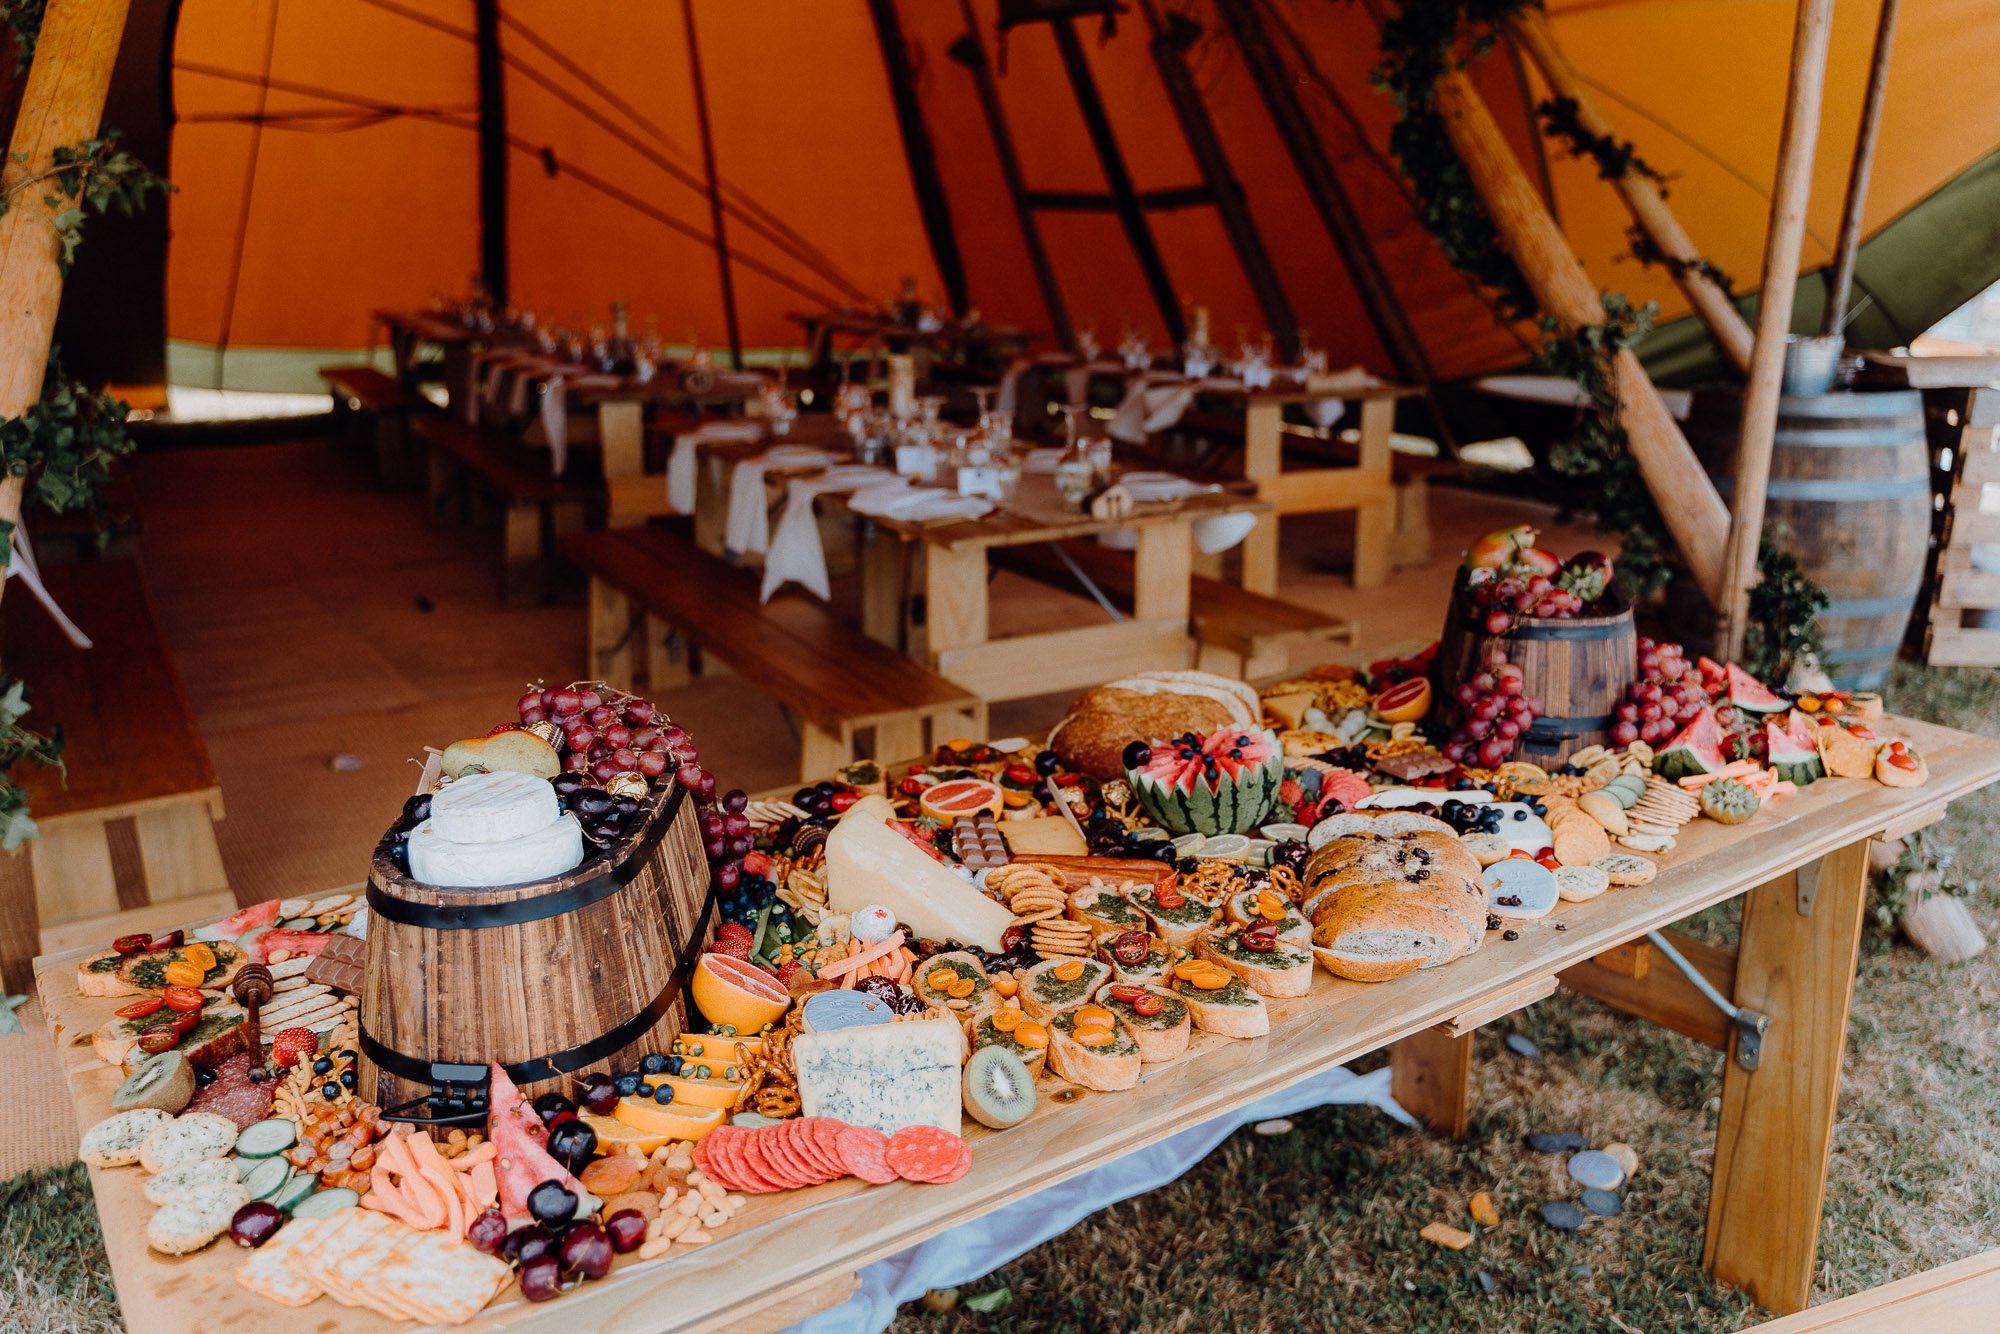 Wedding Photography Of Grazing Table Ideas 024. A country and rural themed grazing table.